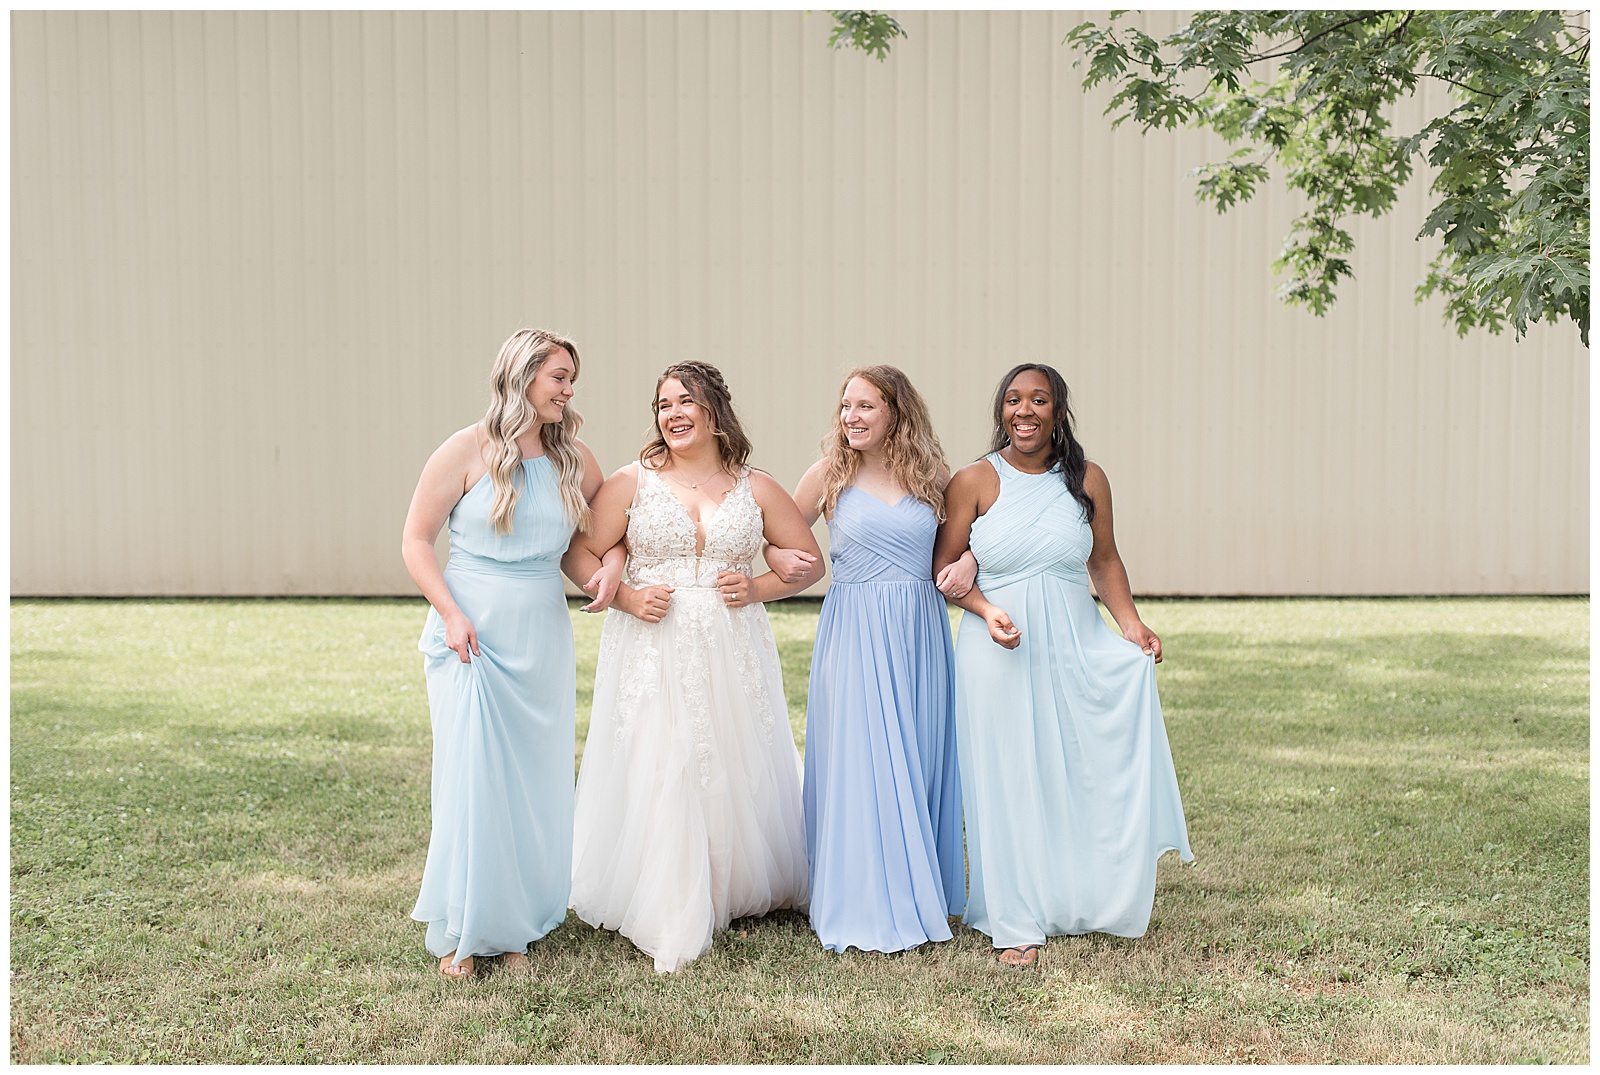 bridesmaids with arms linked walking and laughing together